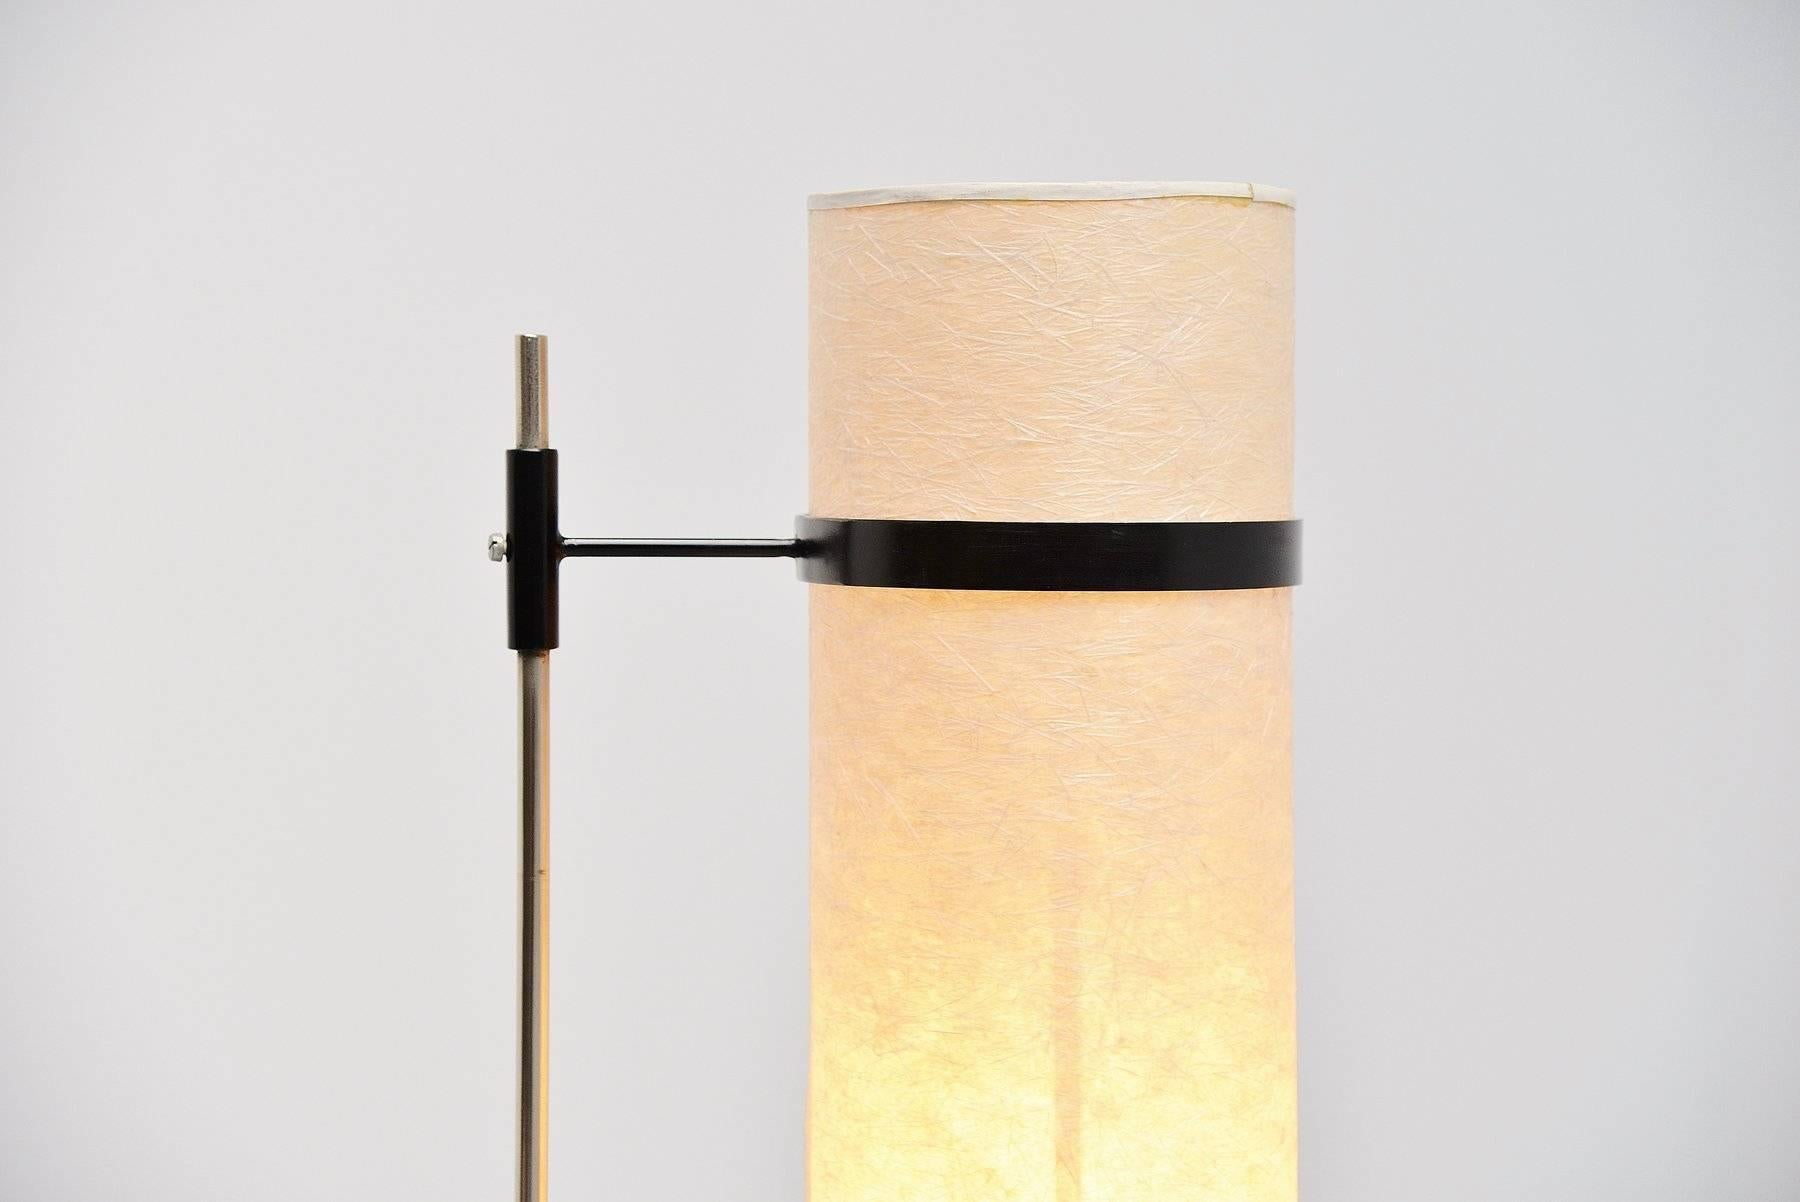 Very nice shaped modernist floor lamp made in the manner of Kho Liang Ie, Holland, 1960. This floor lamp has a weighted V-shaped base and a nickel-plated bar with black lacquered shade holder and rice paper shade. The lamp is in fully original